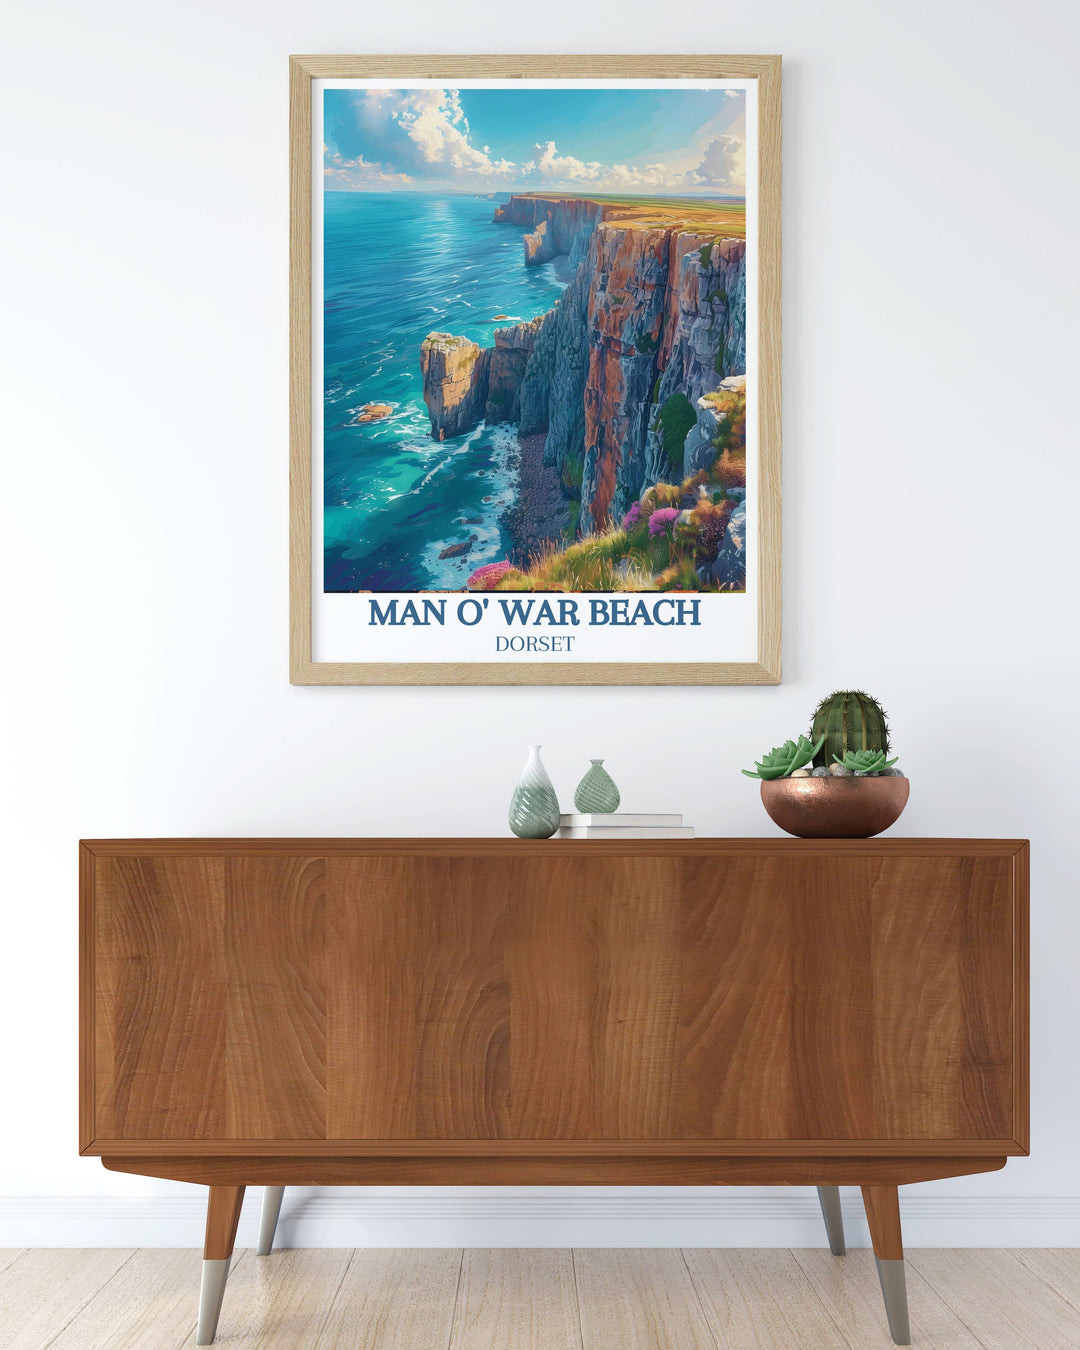 Durdle Door Arch and Jurassic Park Cliffs framed print featuring the picturesque scenery of Dorset ideal for home decor and gift giving capturing the essence of these stunning coastal landmarks in vibrant colors and detailed imagery perfect for travel enthusiasts and nature lovers.